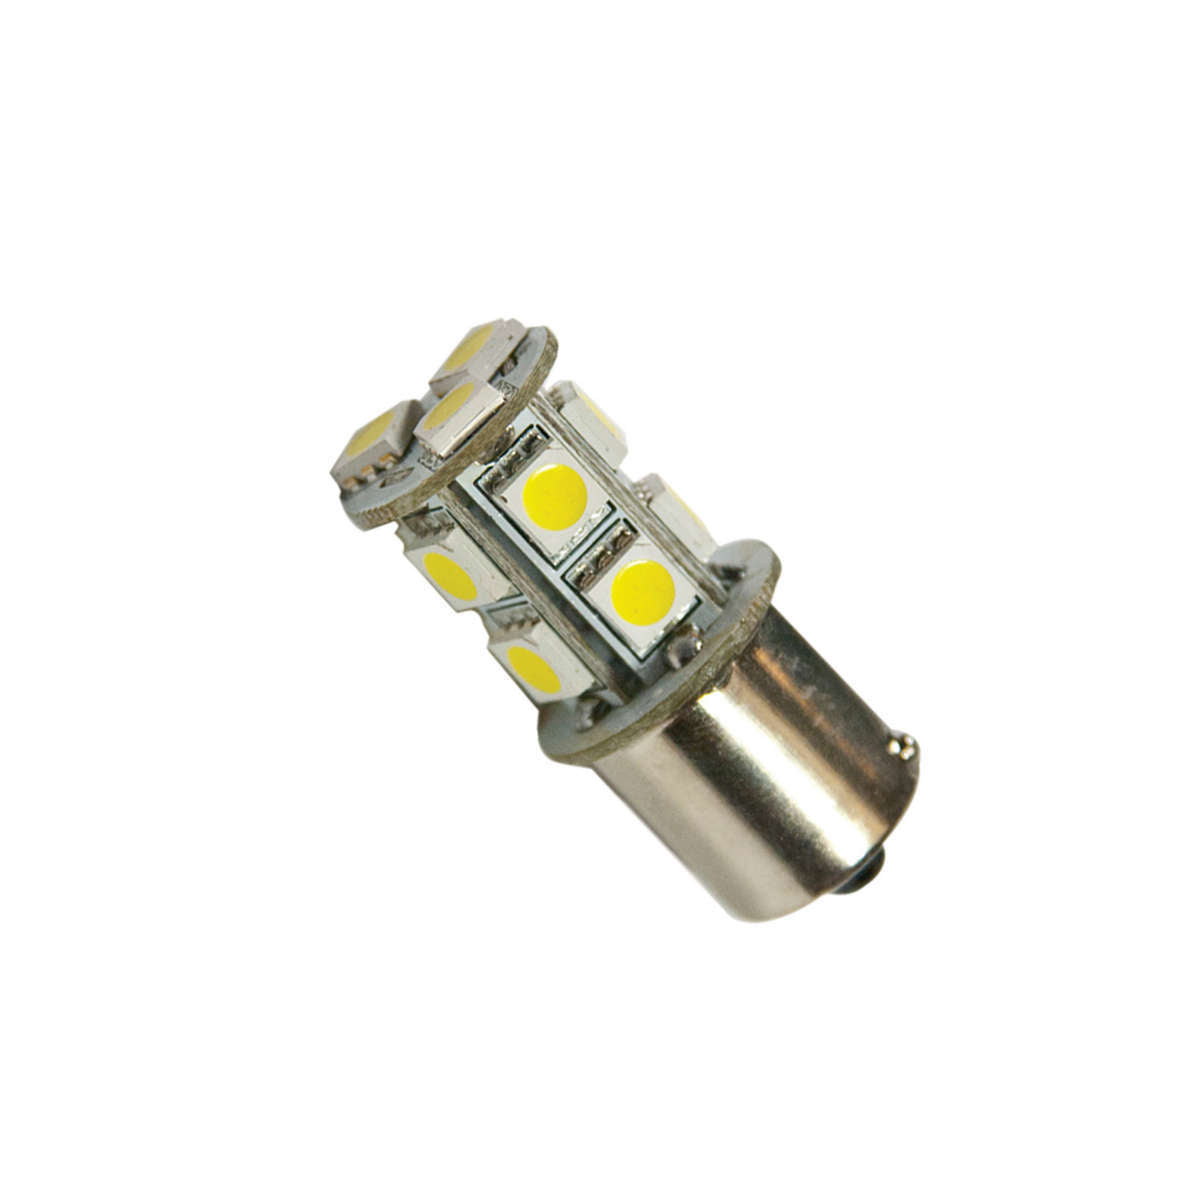 Oracle Lighting1156 13 LED 3-Chip Bulb Single Cool White